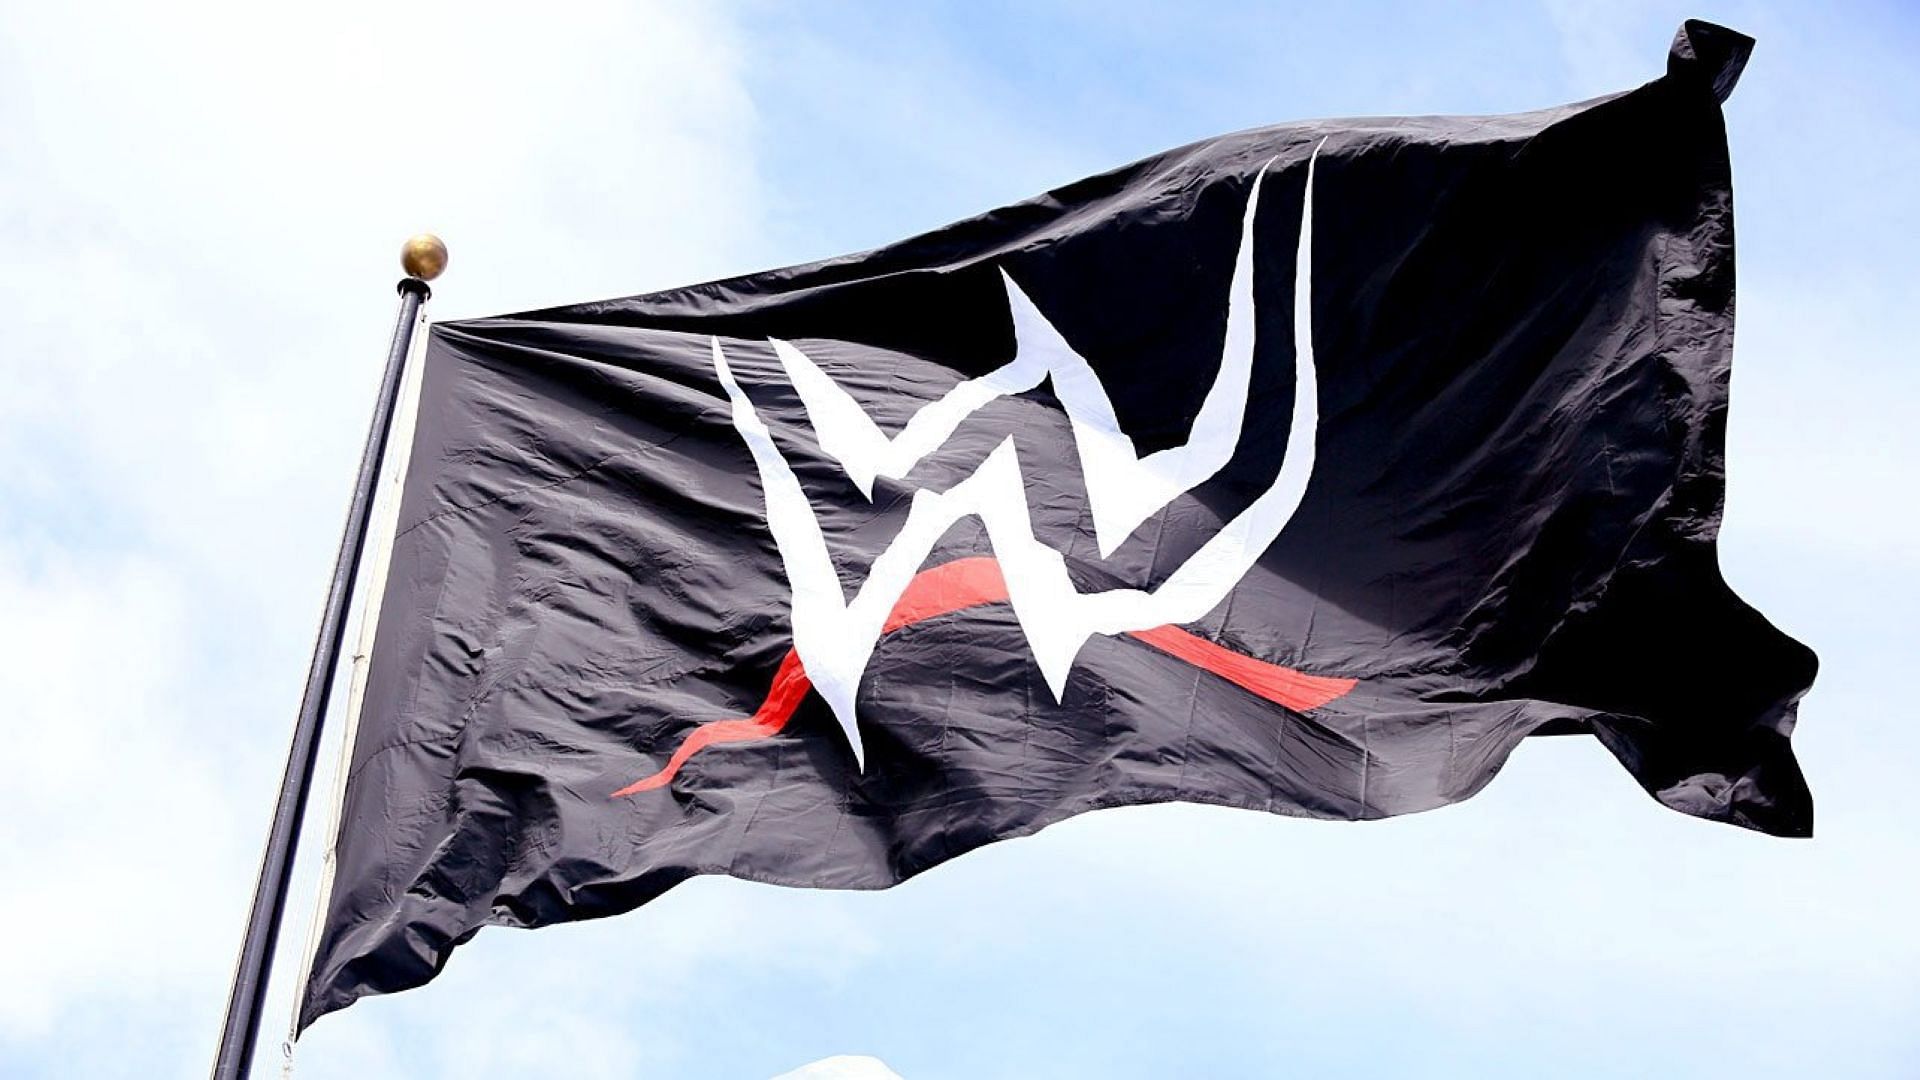 The logo flag at WWE HQ in Stamford